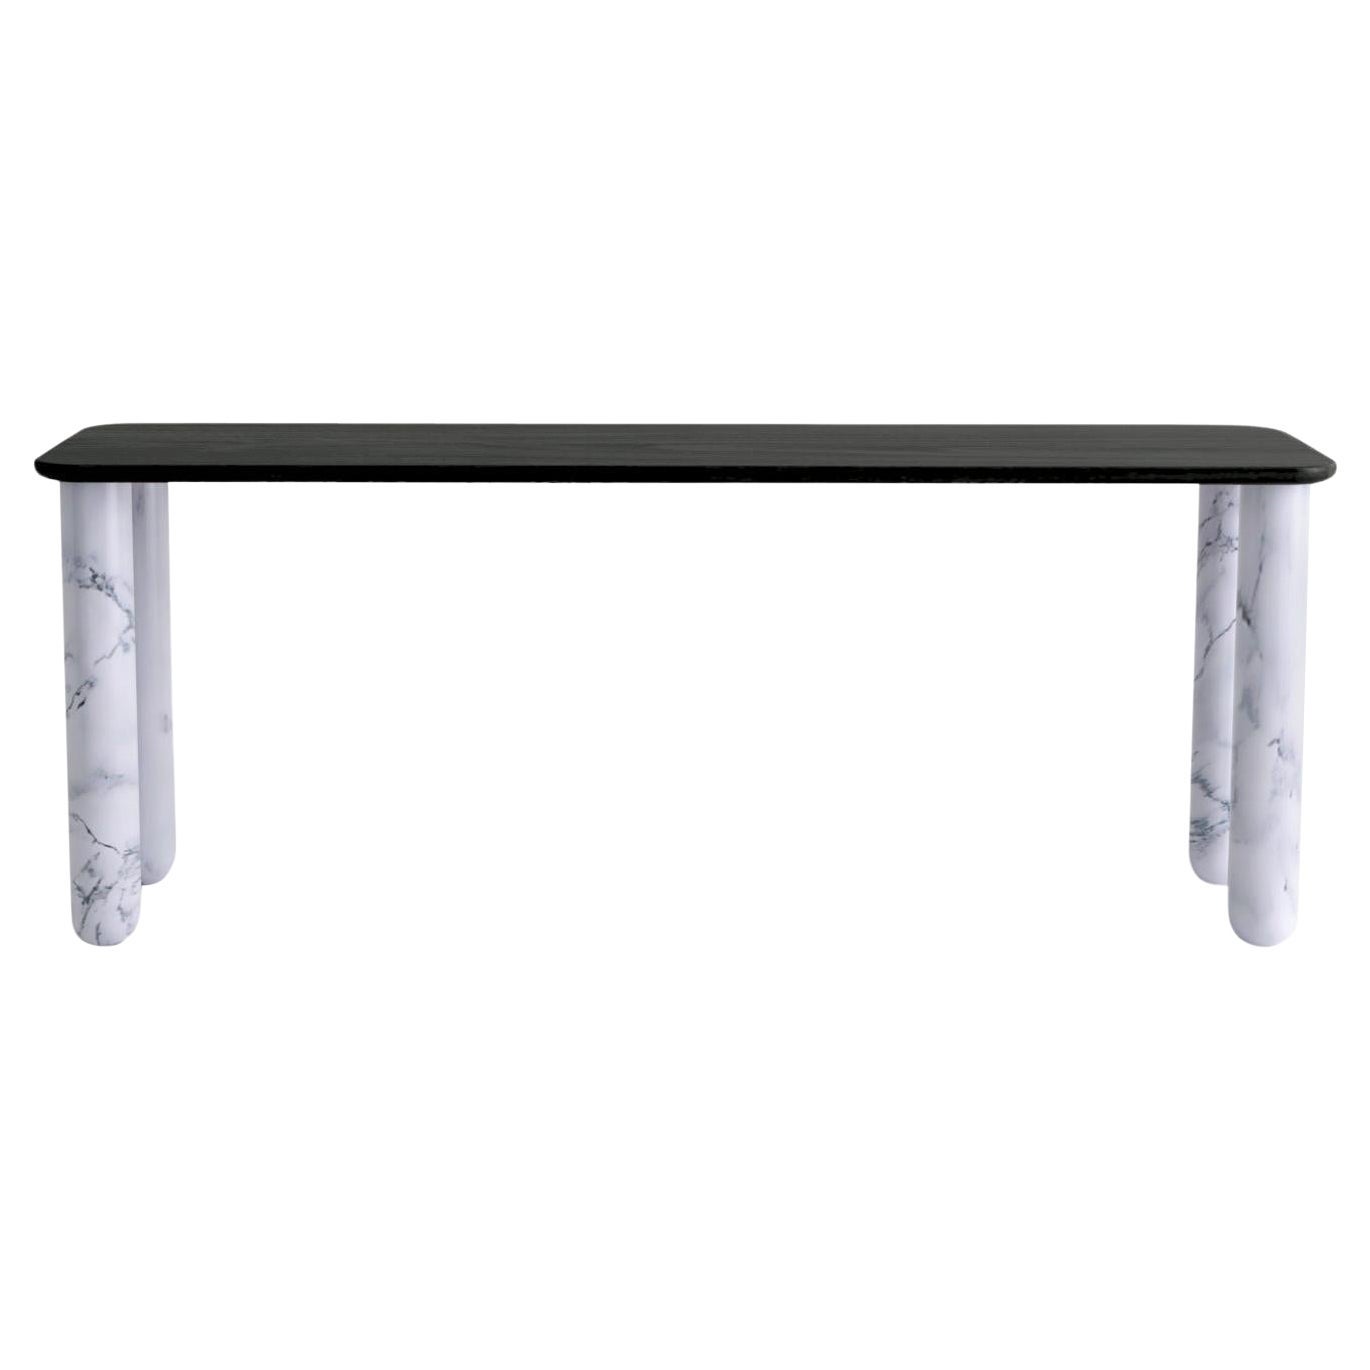 Large Black Wood and White Marble "Sunday" Dining Table, Jean-Baptiste Souletie For Sale